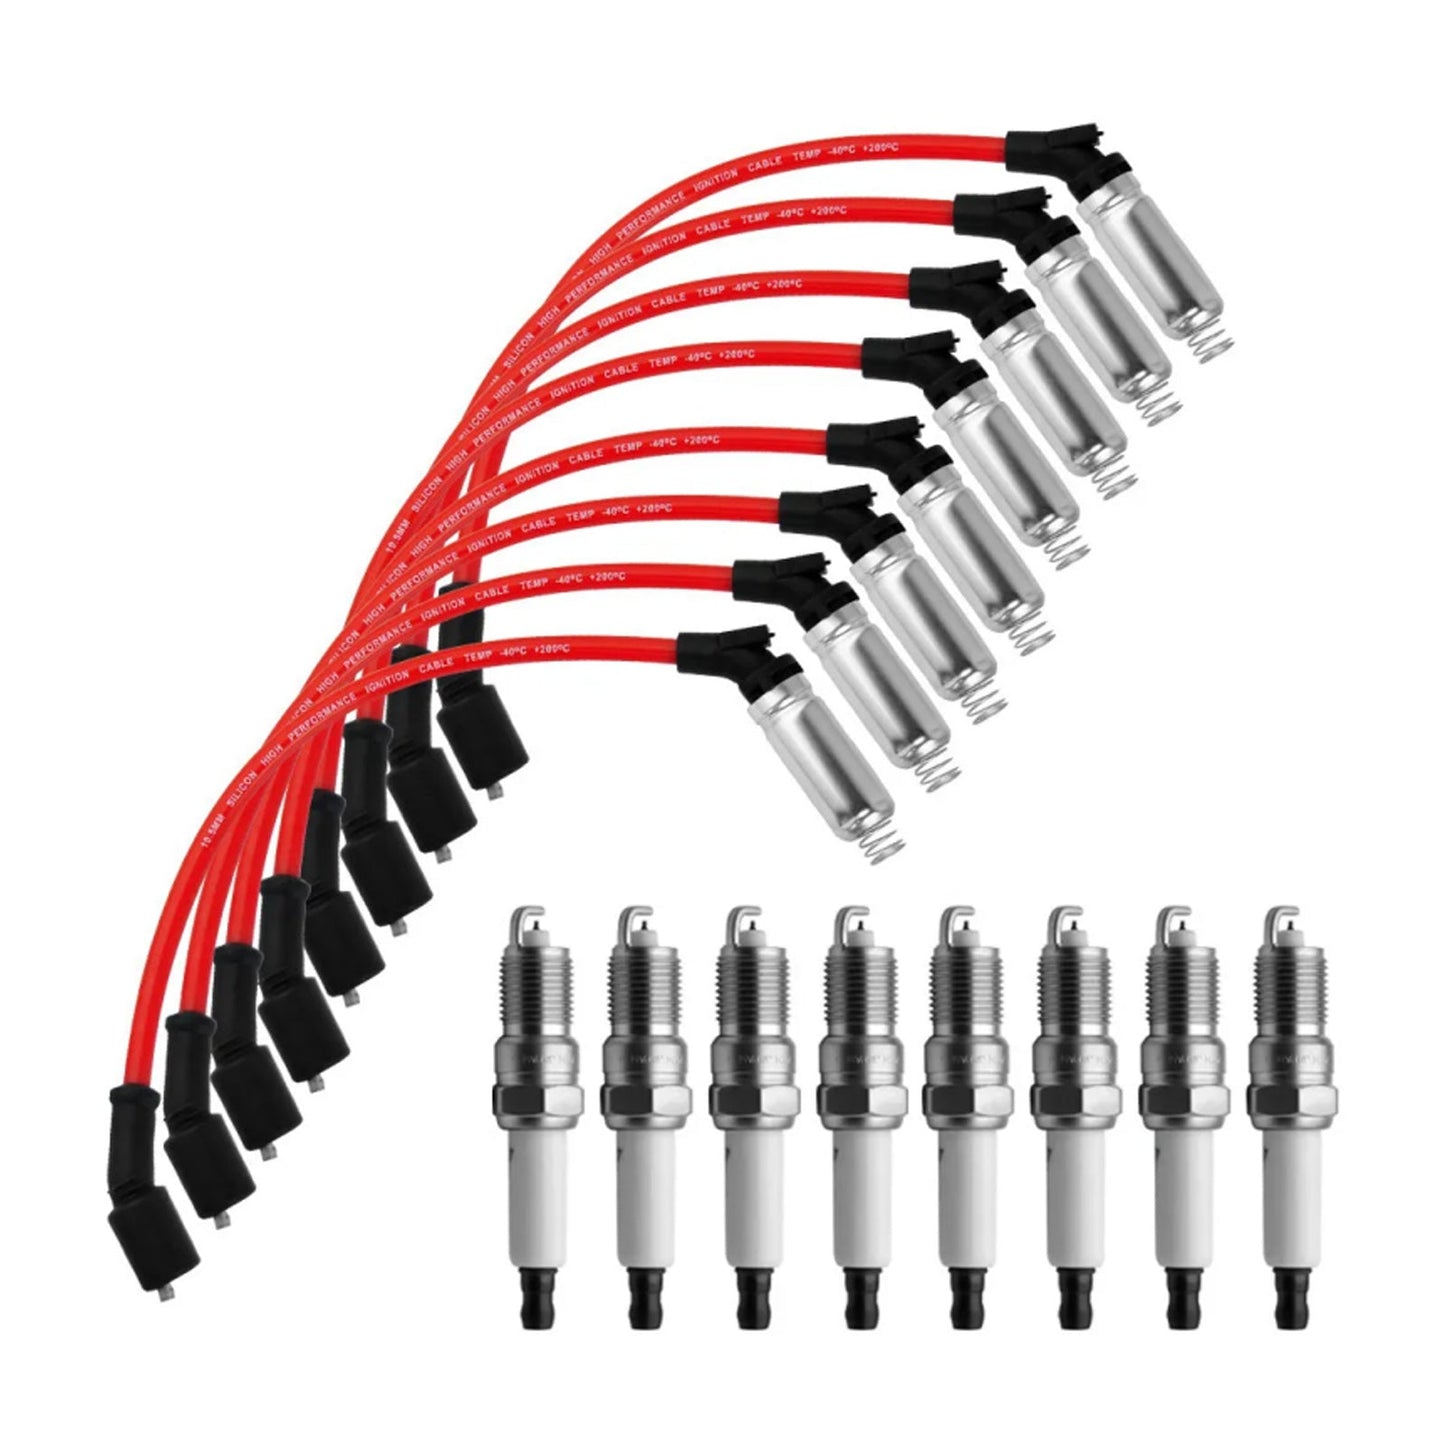 8x Spark Plugs +Wires 10.5mm Set 19299585 For Chevy GMC 4.8L 5.3L 6.0L V8